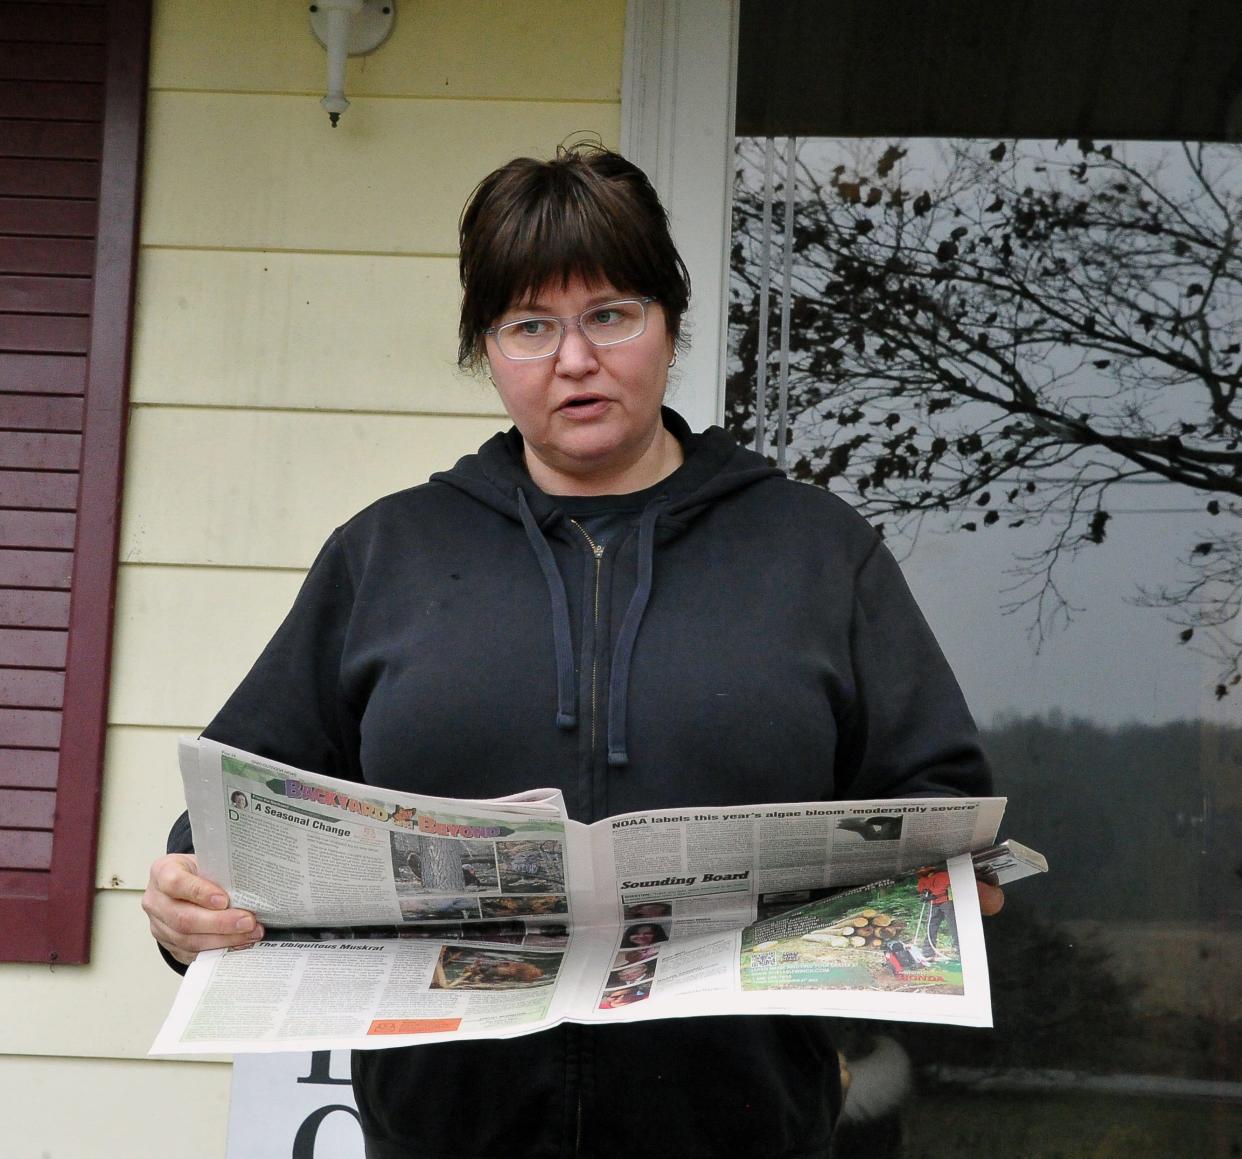 Jodi Tincher talks about the storage pond near her house on Pleasant Home Road. She reads a line from a news story about a similar situation elsewhere in Ohio.